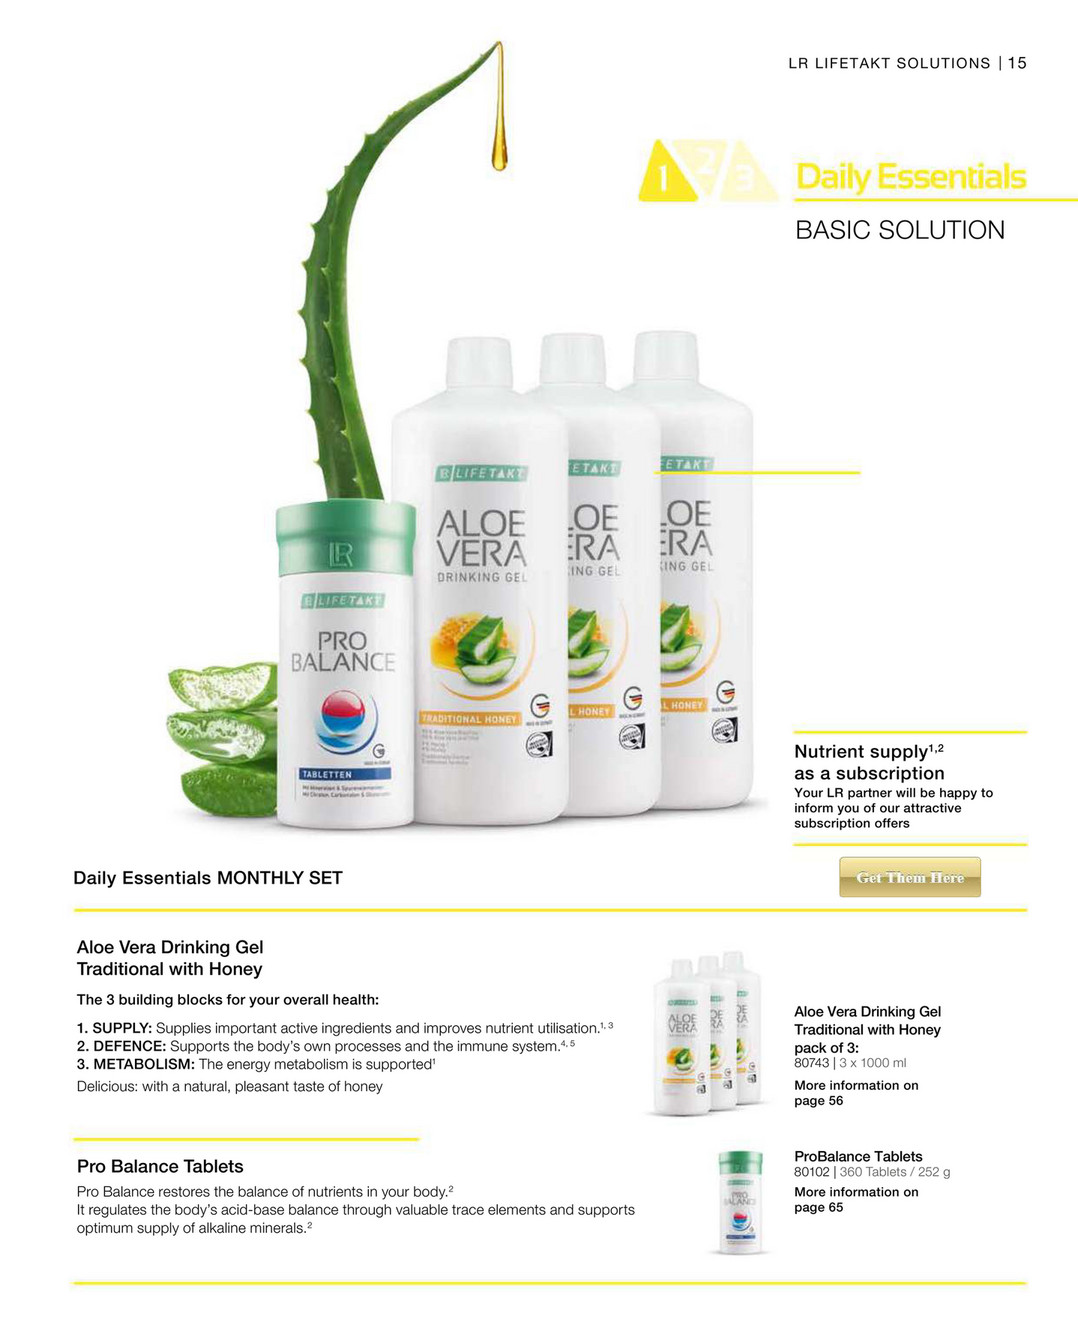 kleding schending Knipperen My publications - High Quality Lr Aloe Vera Products - Aloe Vera Gel, Aloe  Vera Drink and More - Page 2-3 - Created with Publitas.com